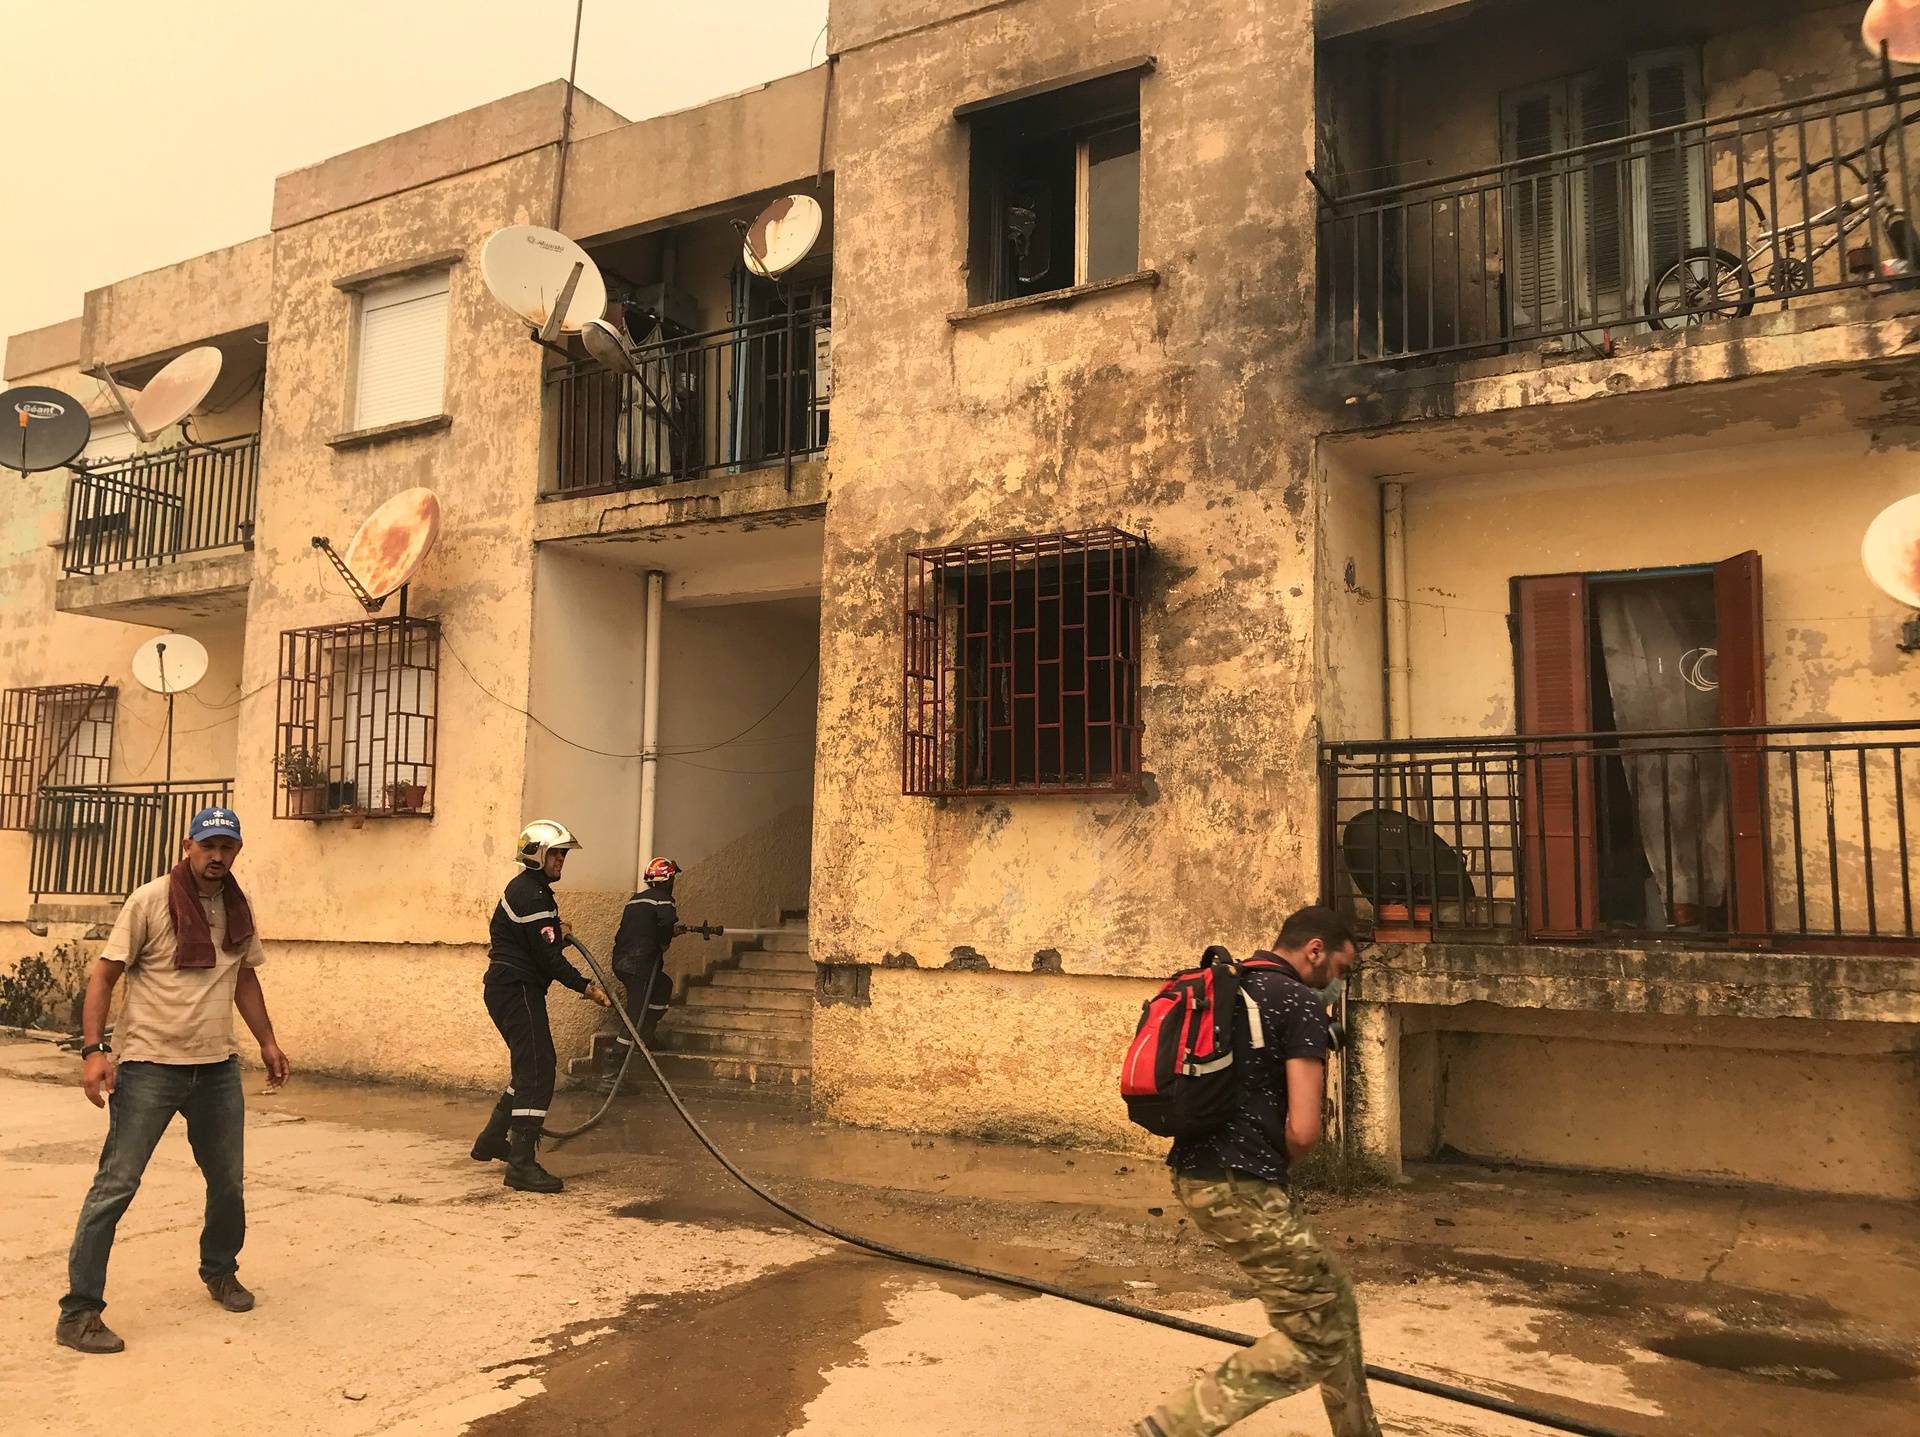 Firefighters and residents attempt to put out a fire at a building in Ain al-Hammam village